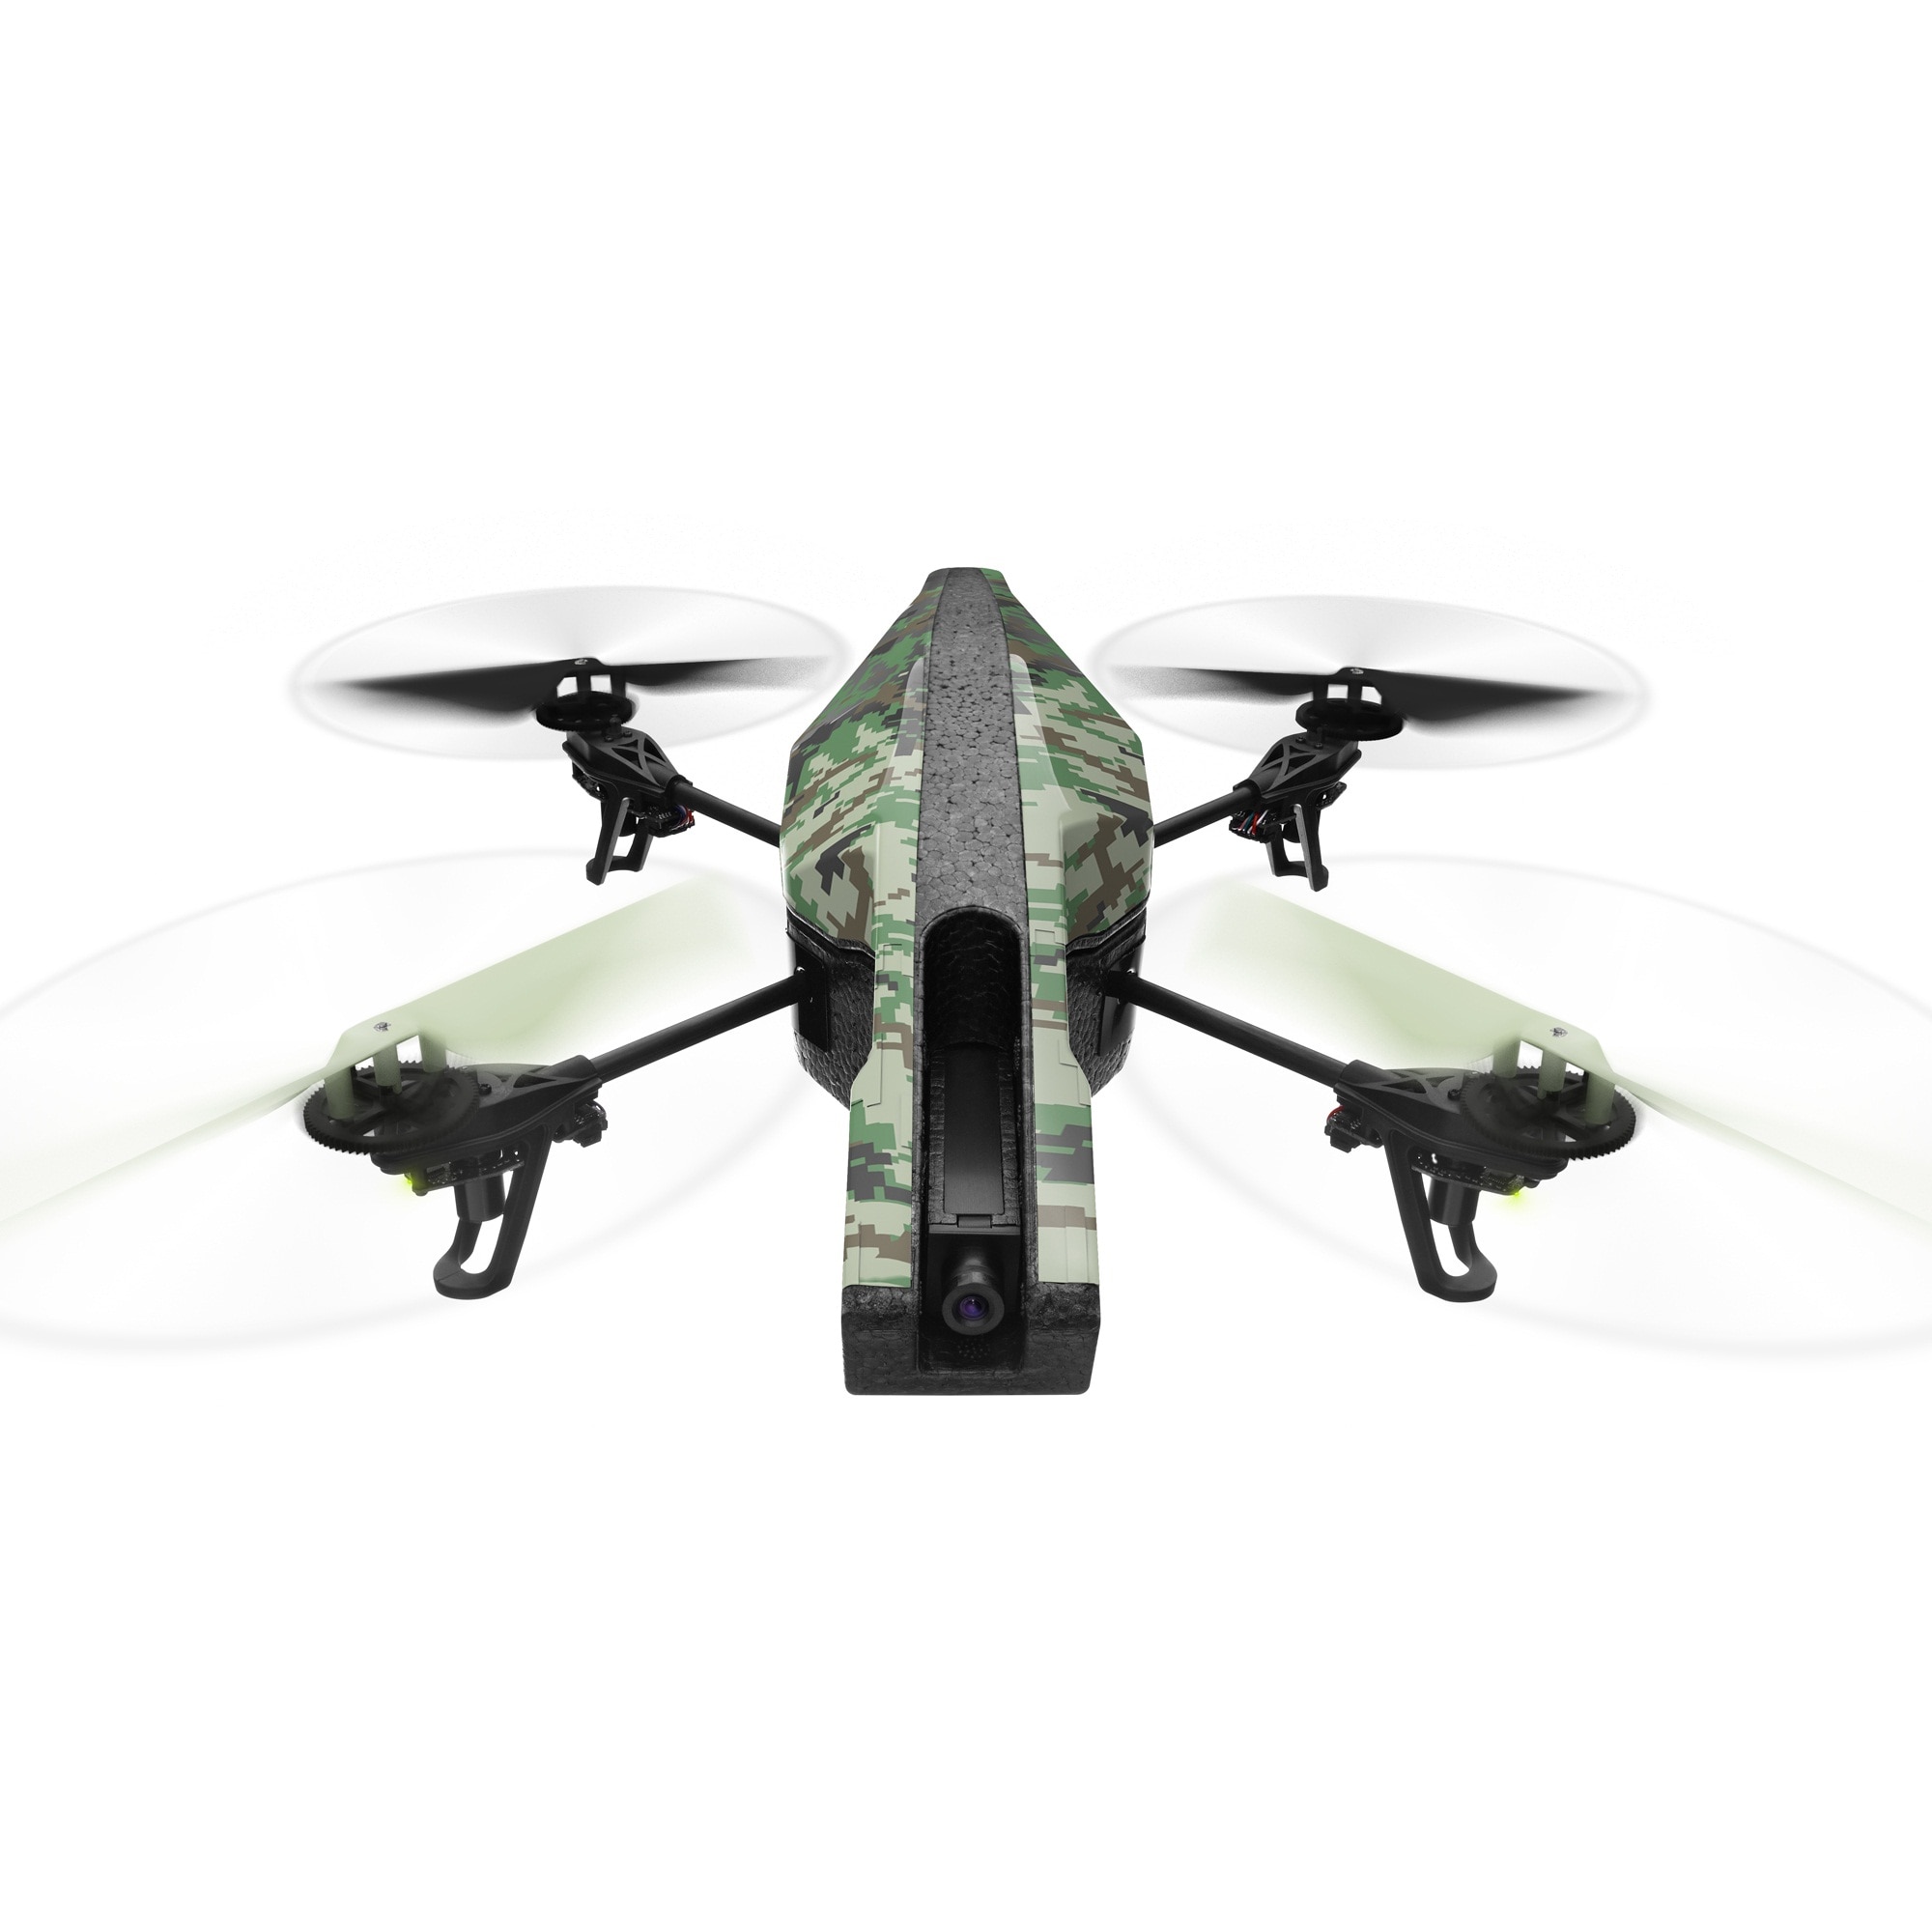 Outlook budget Badly Drona Parrot AR.Drone 2.0 Elite Edition, Jungle - eMAG.ro